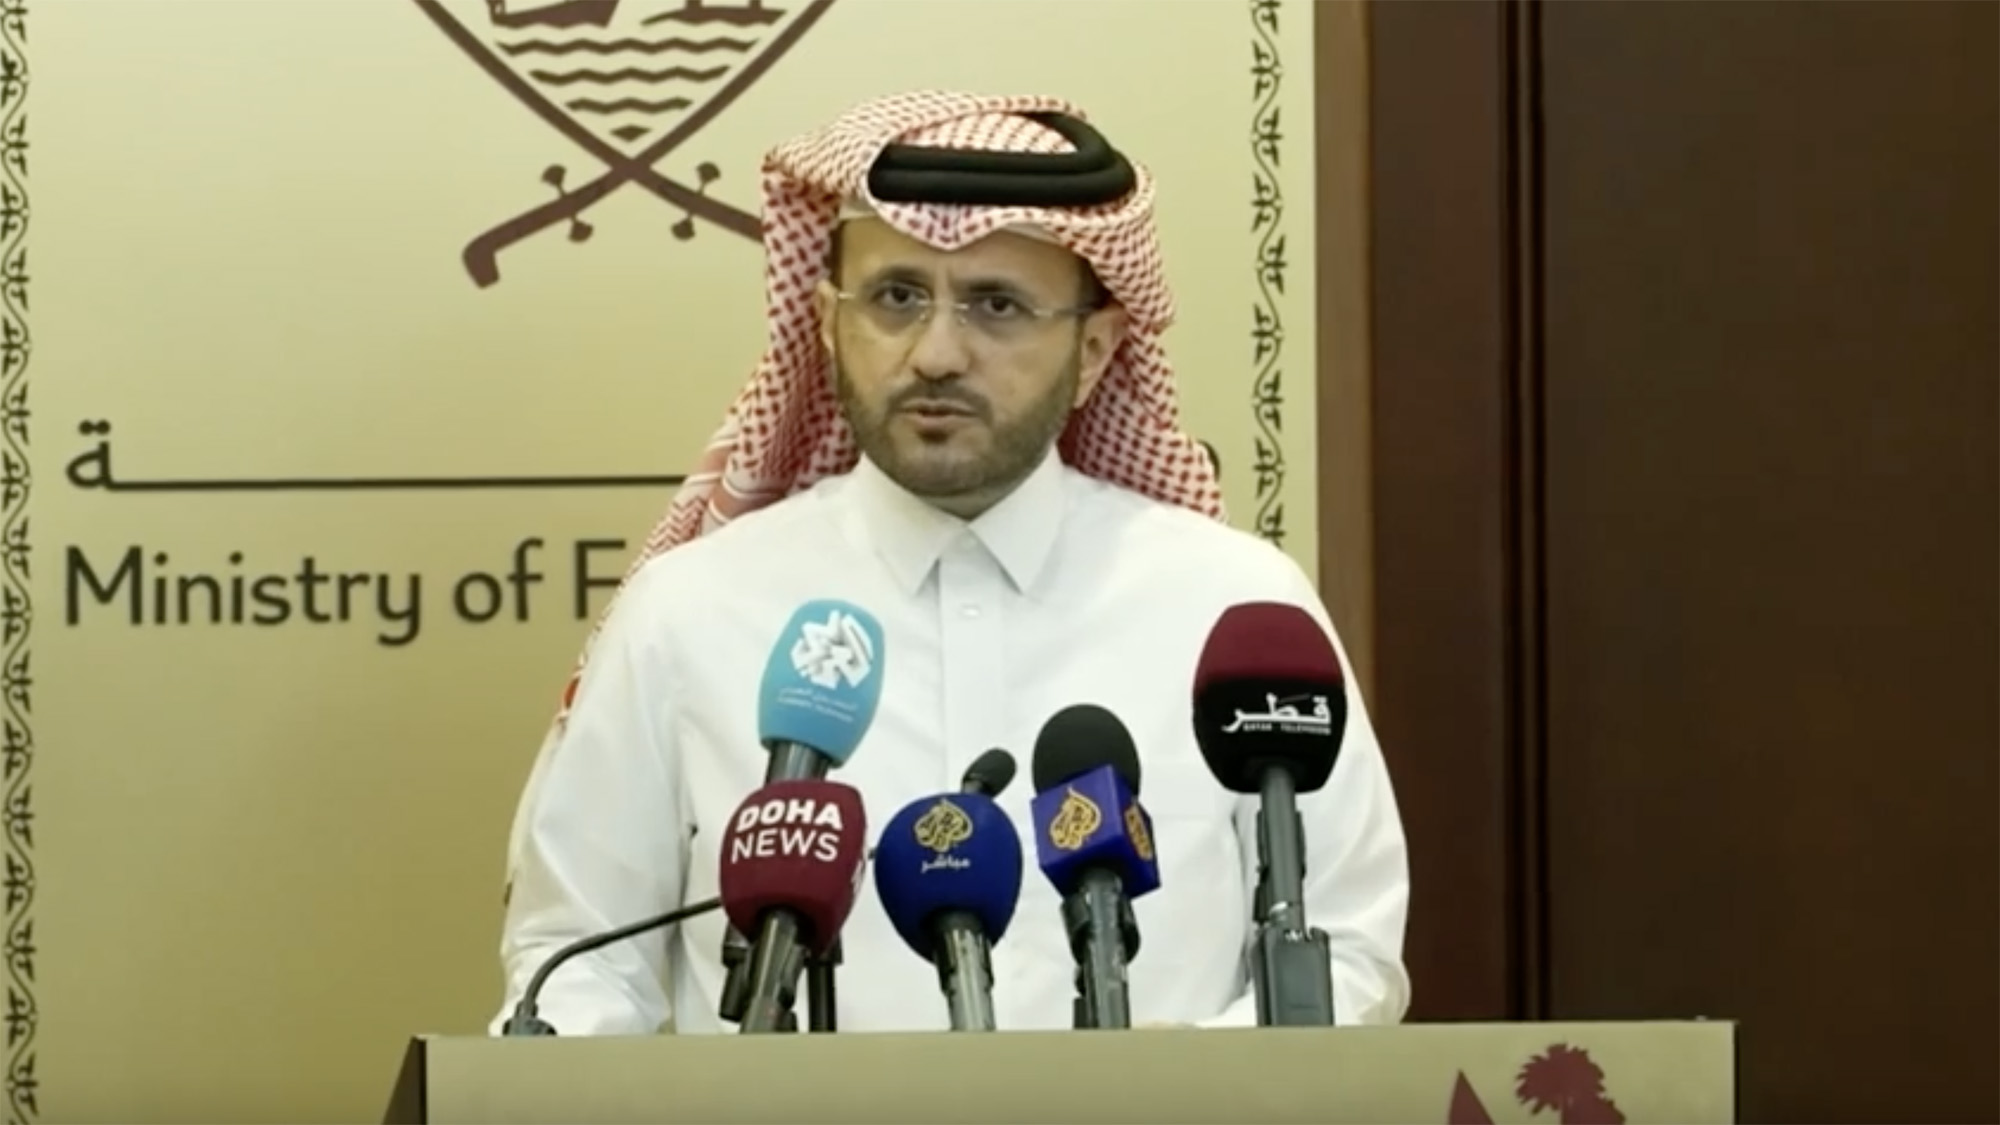 Qatar foreign ministry spokesperson Majed Al-Ansari delivers a press conference on November 23